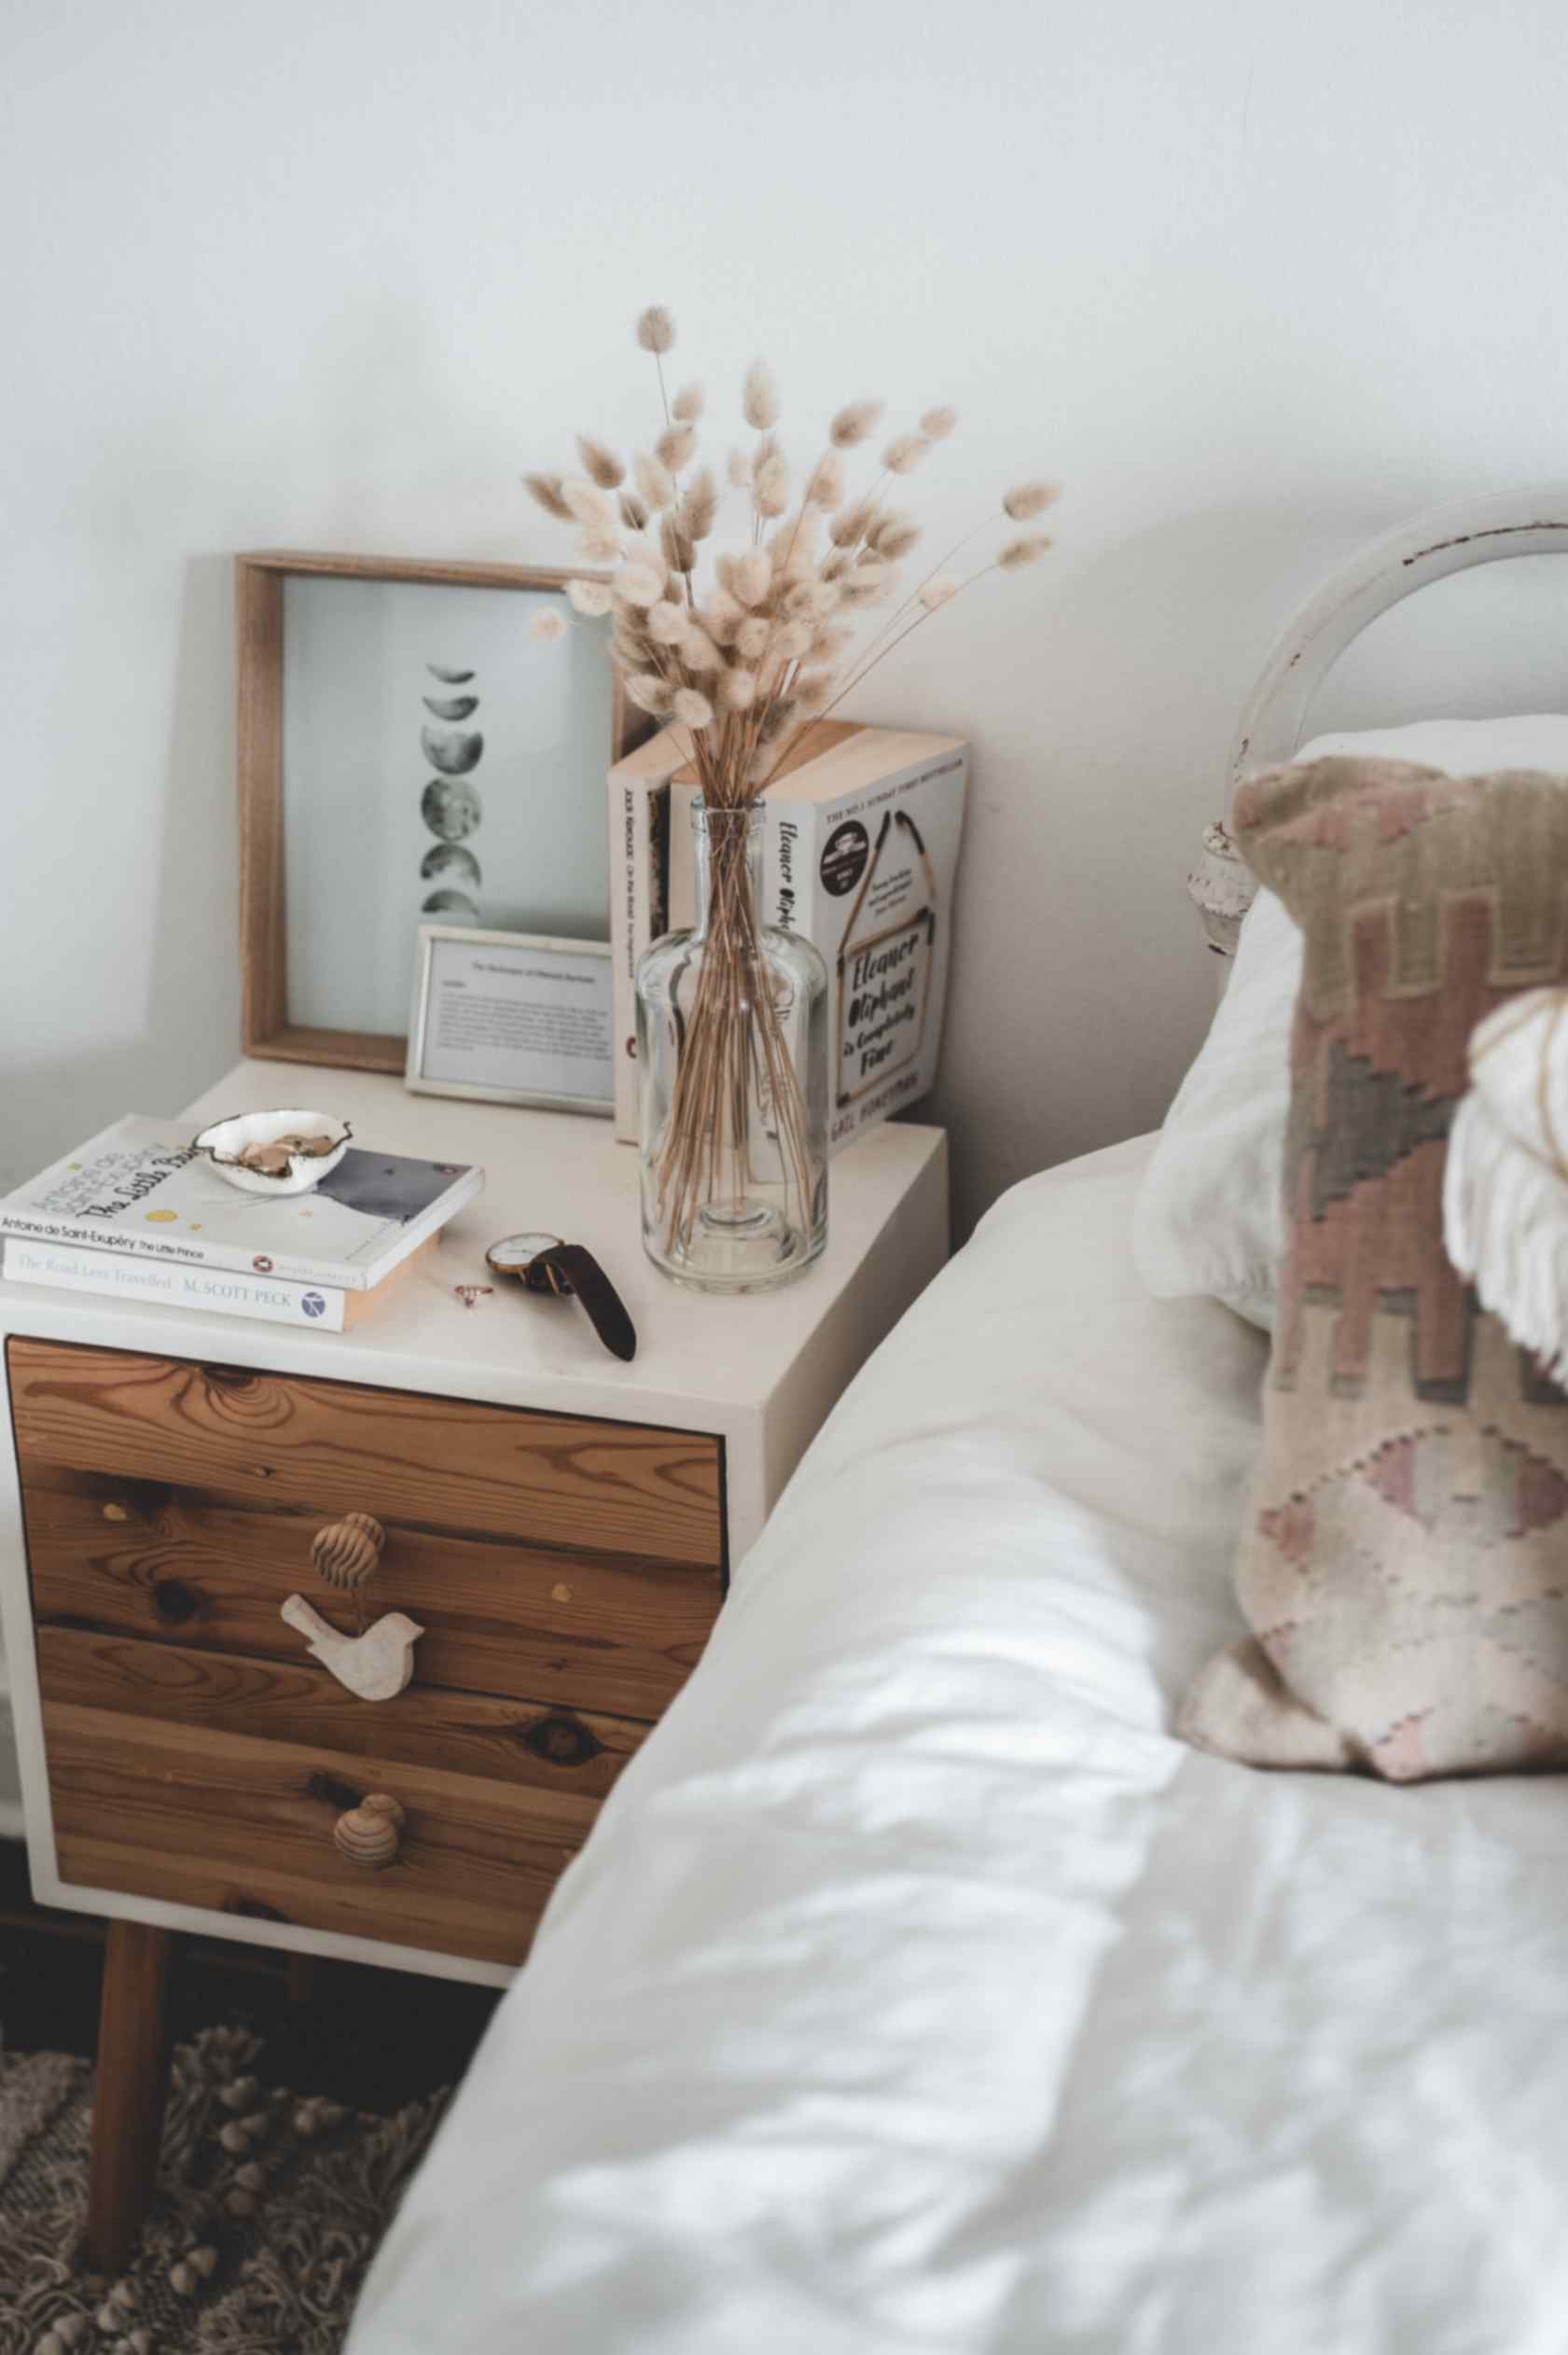 Searching for bedside tables? Why a bedside table is important?